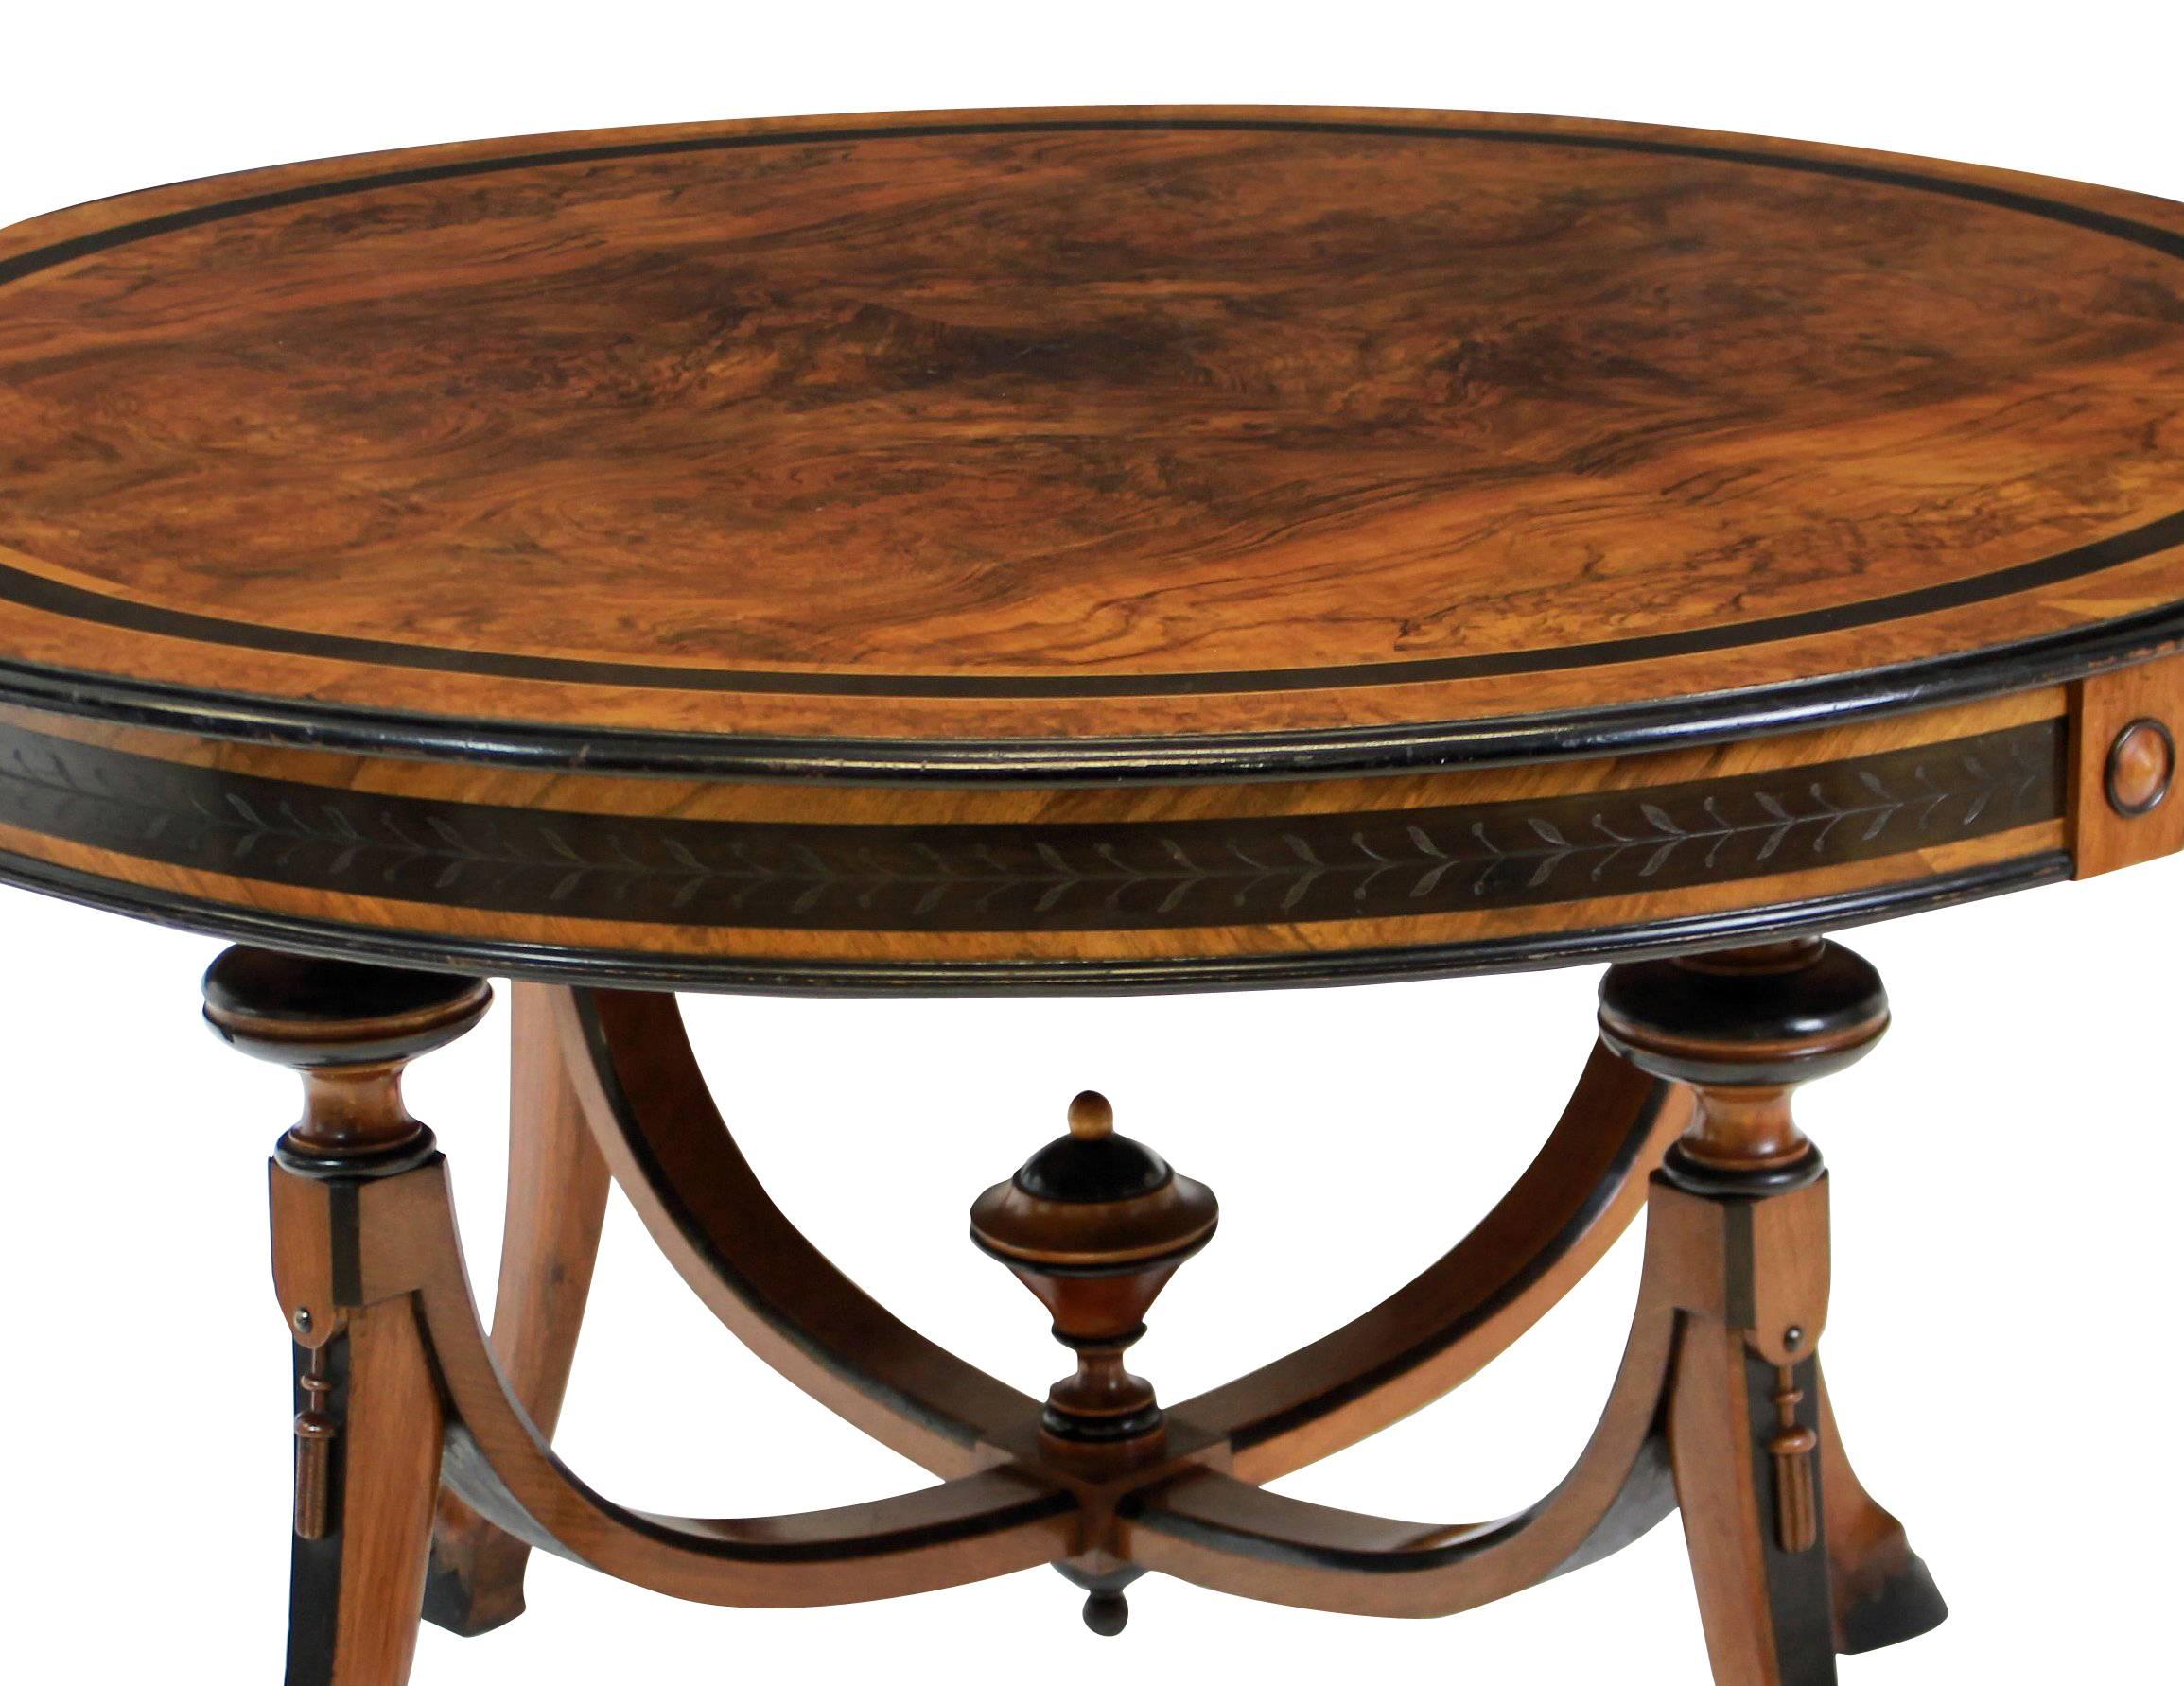 A fine French walnut and ebony circular sofa table with beautiful figuring and detail on hoof feet.
 